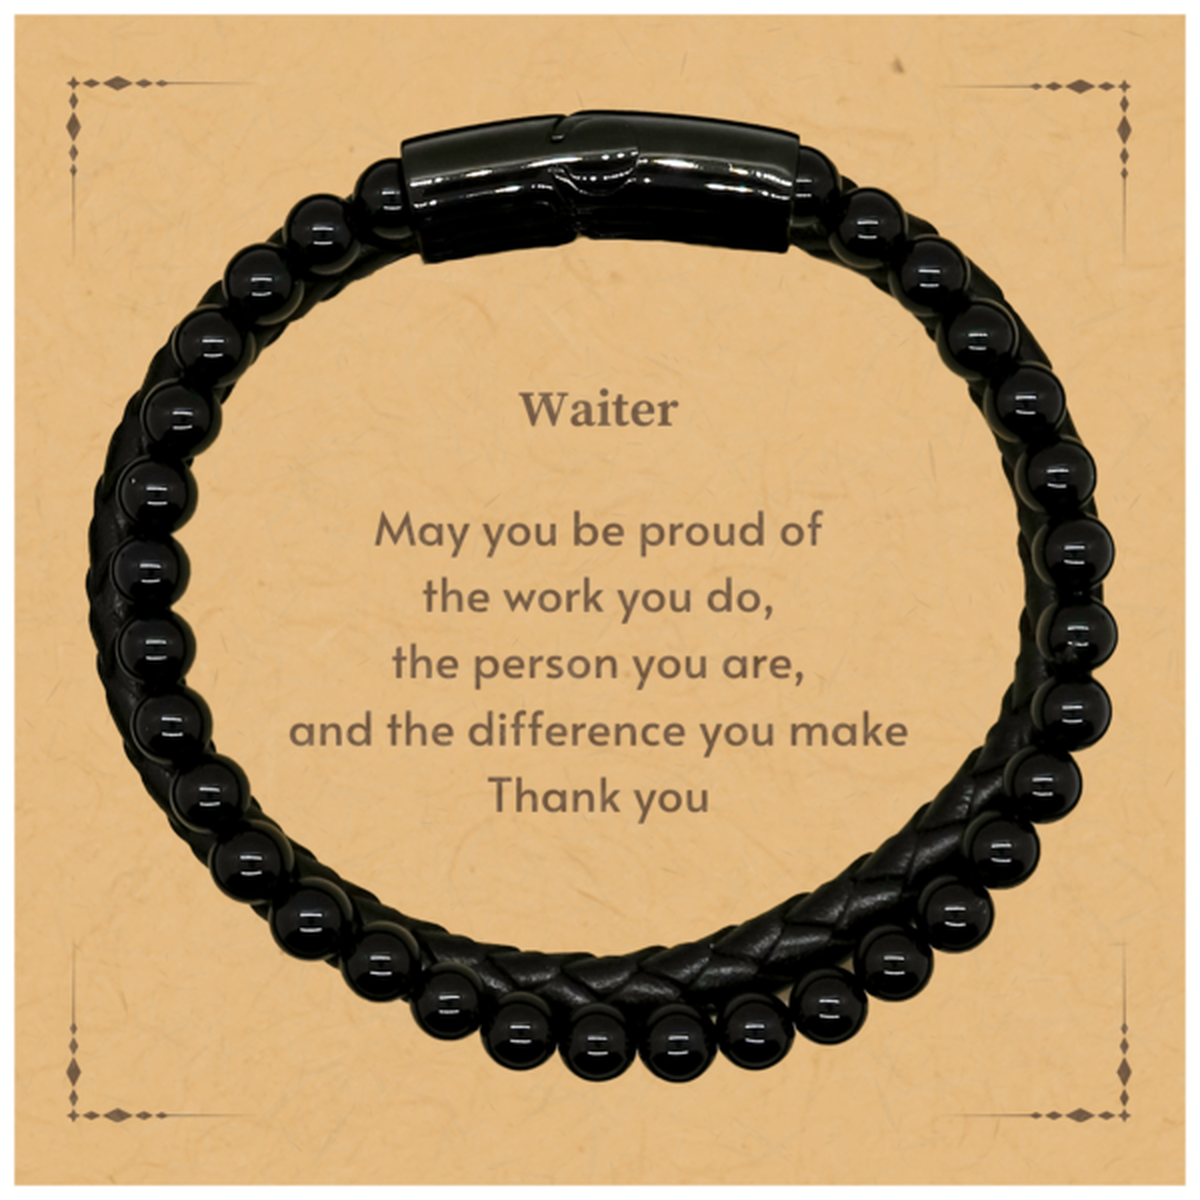 Heartwarming Stone Leather Bracelets Retirement Coworkers Gifts for Waiter, Waiter May You be proud of the work you do, the person you are Gifts for Boss Men Women Friends